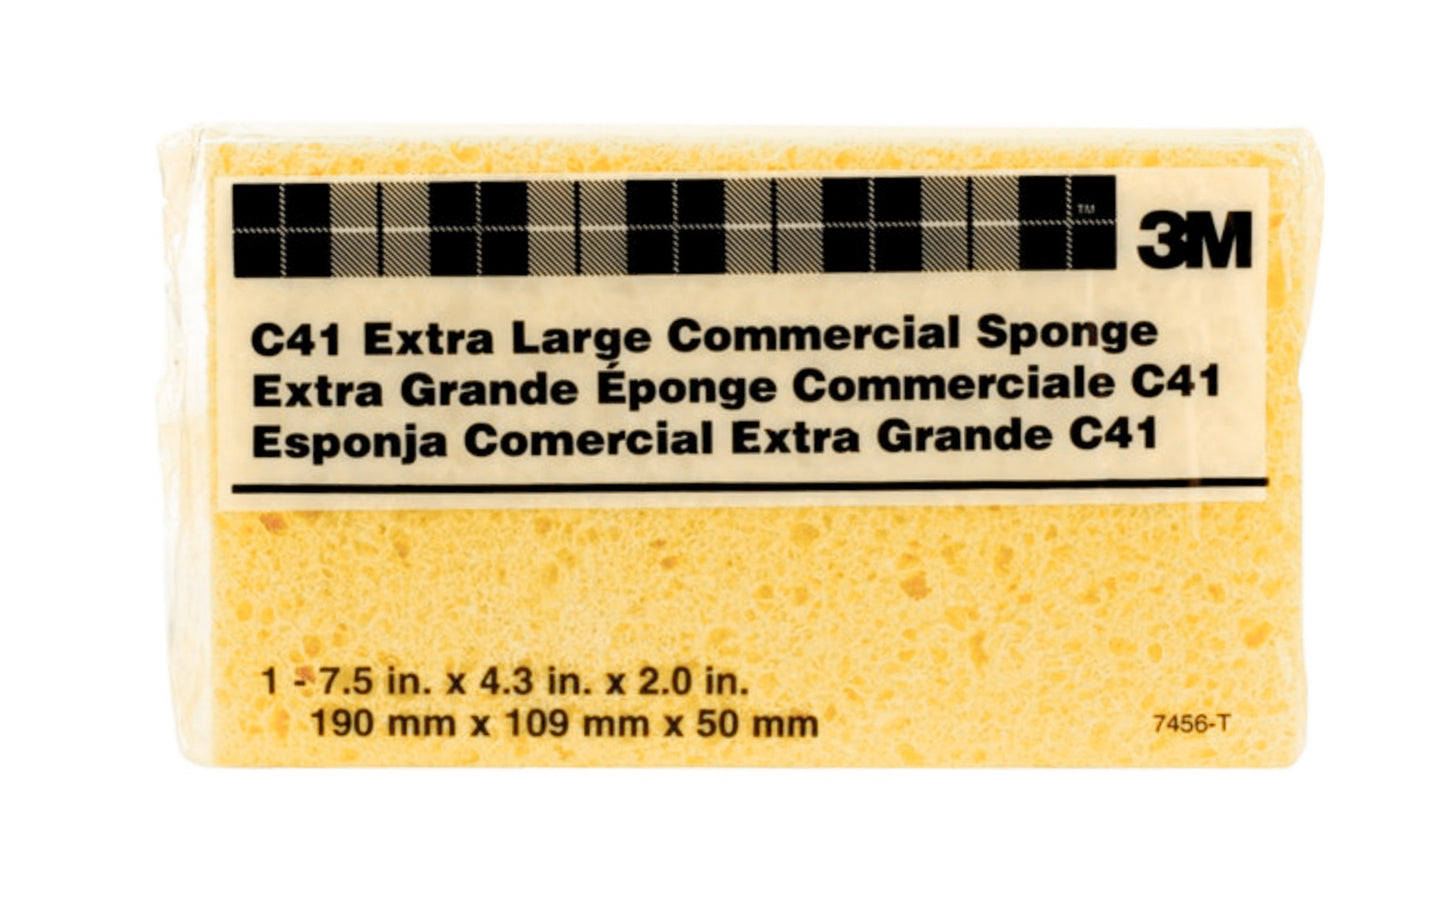 This 3M C41 Extra Large Commercial Sponge - 7.5"  x  4.3"  x 2". Commercial-sized sponge for jobs when you need a long-lasting, industrial product. Made in USA. 053200074562. 3M XL sponge. Model C41